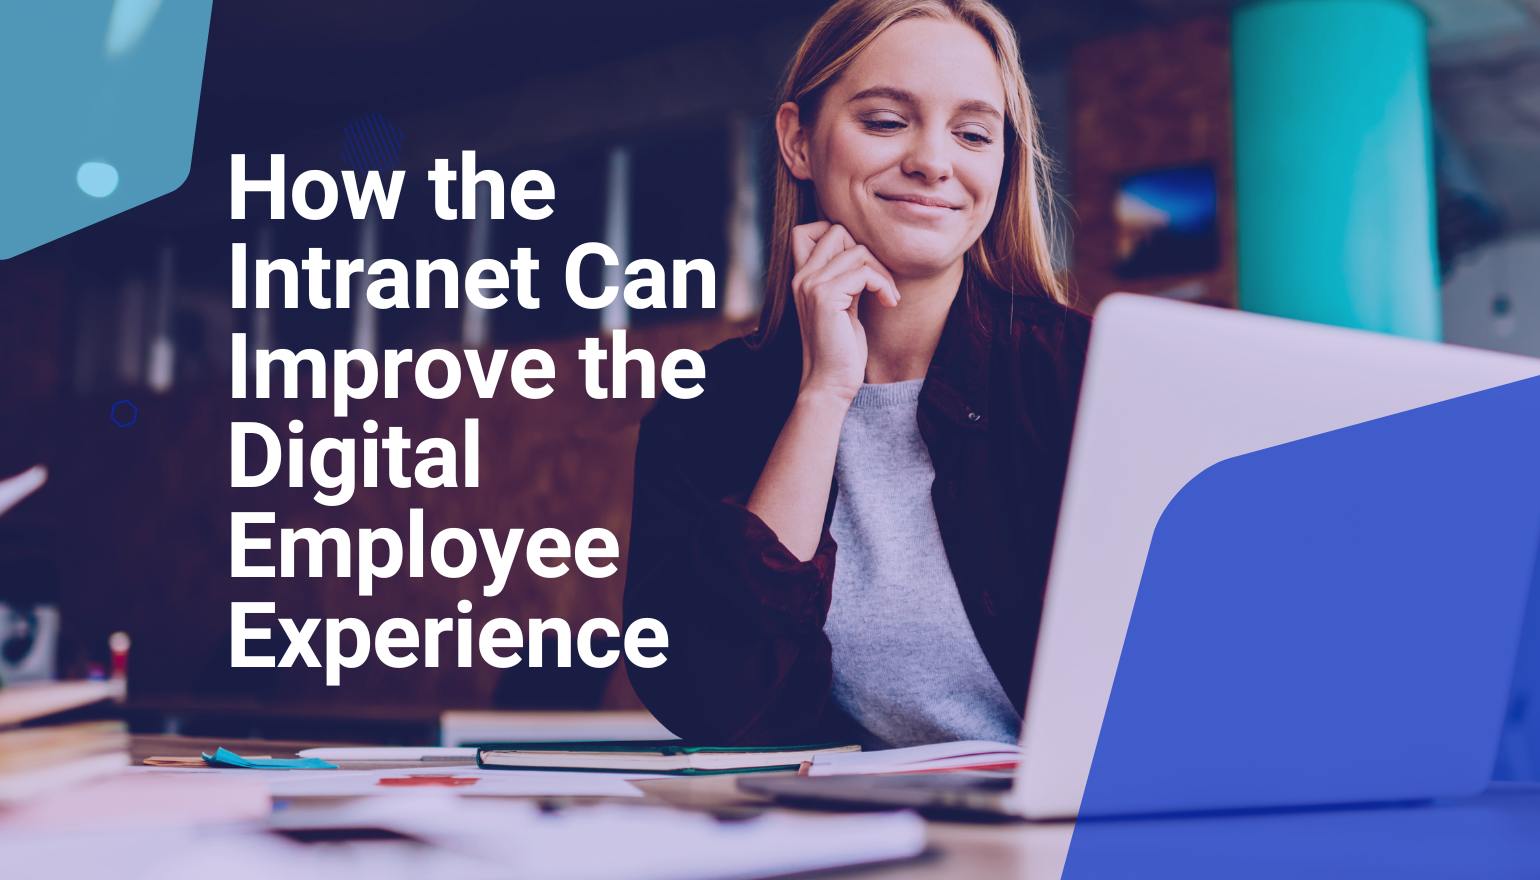 How the Intranet Can Improve the Digital Employee Experience